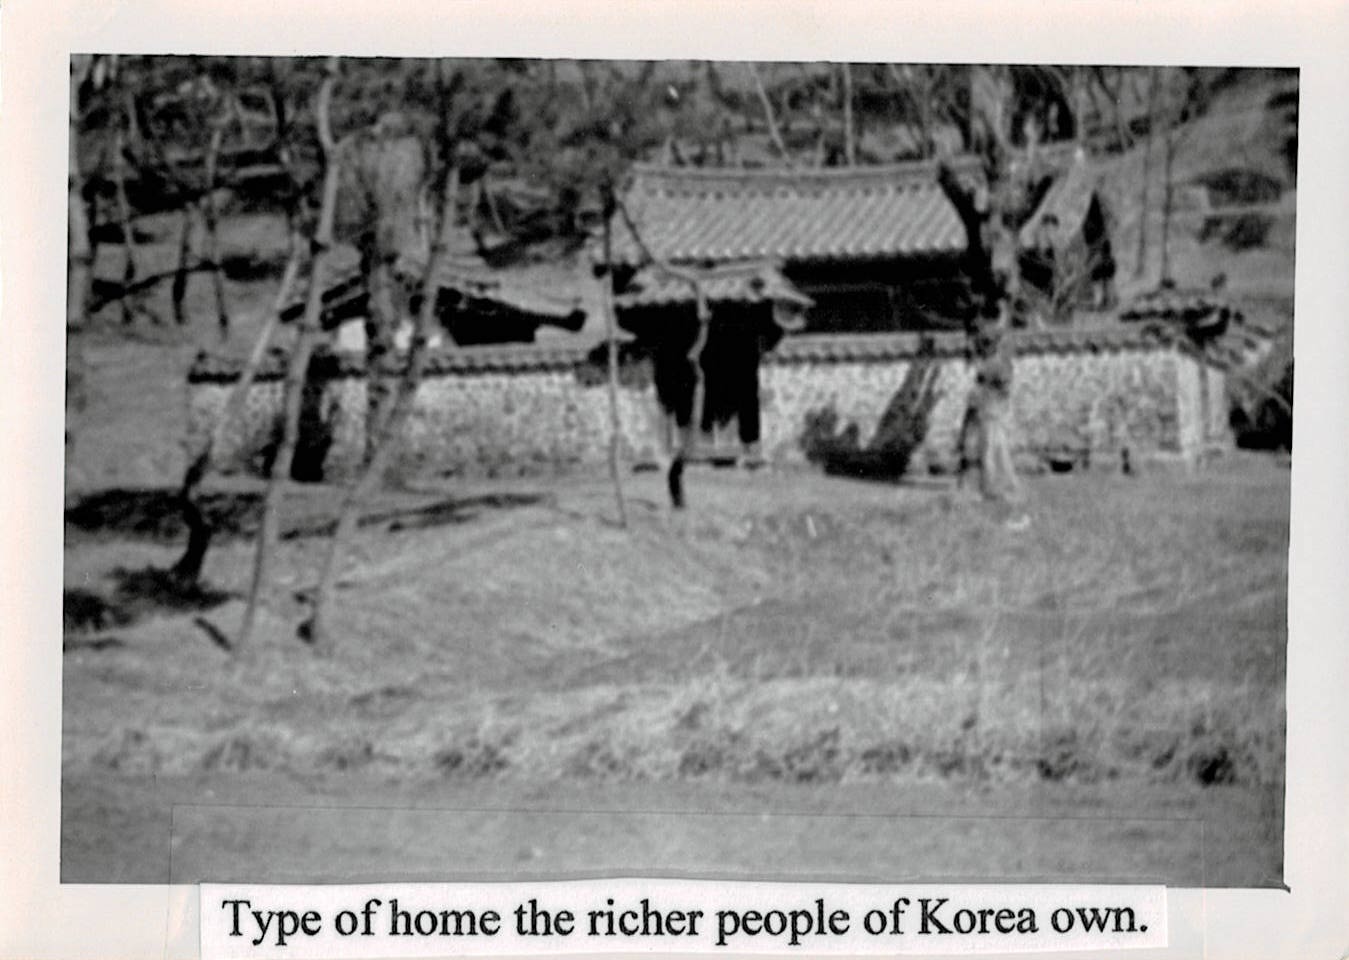 Type of Home the Richer People of Korea Own